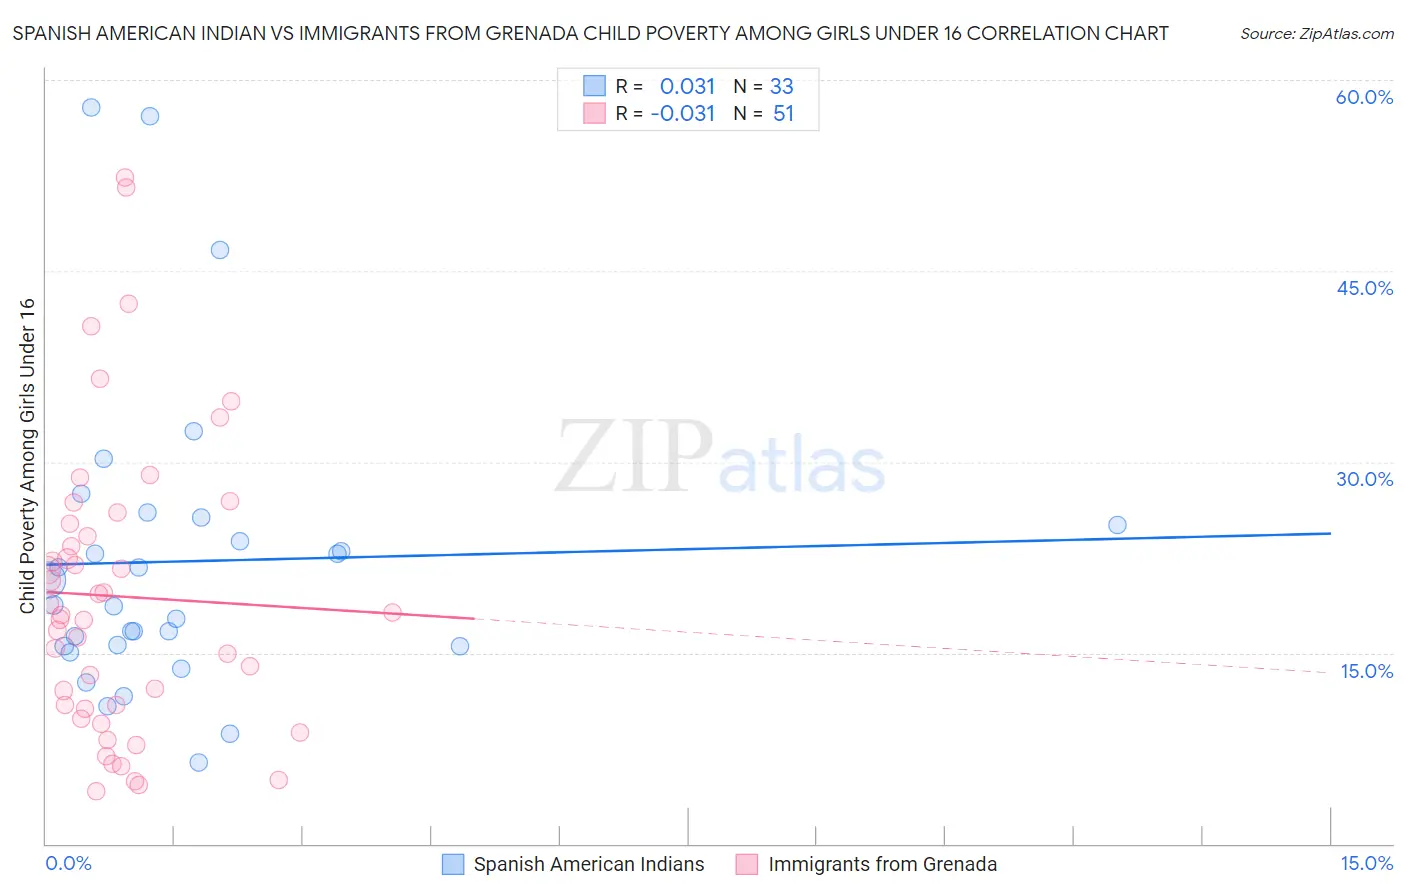 Spanish American Indian vs Immigrants from Grenada Child Poverty Among Girls Under 16